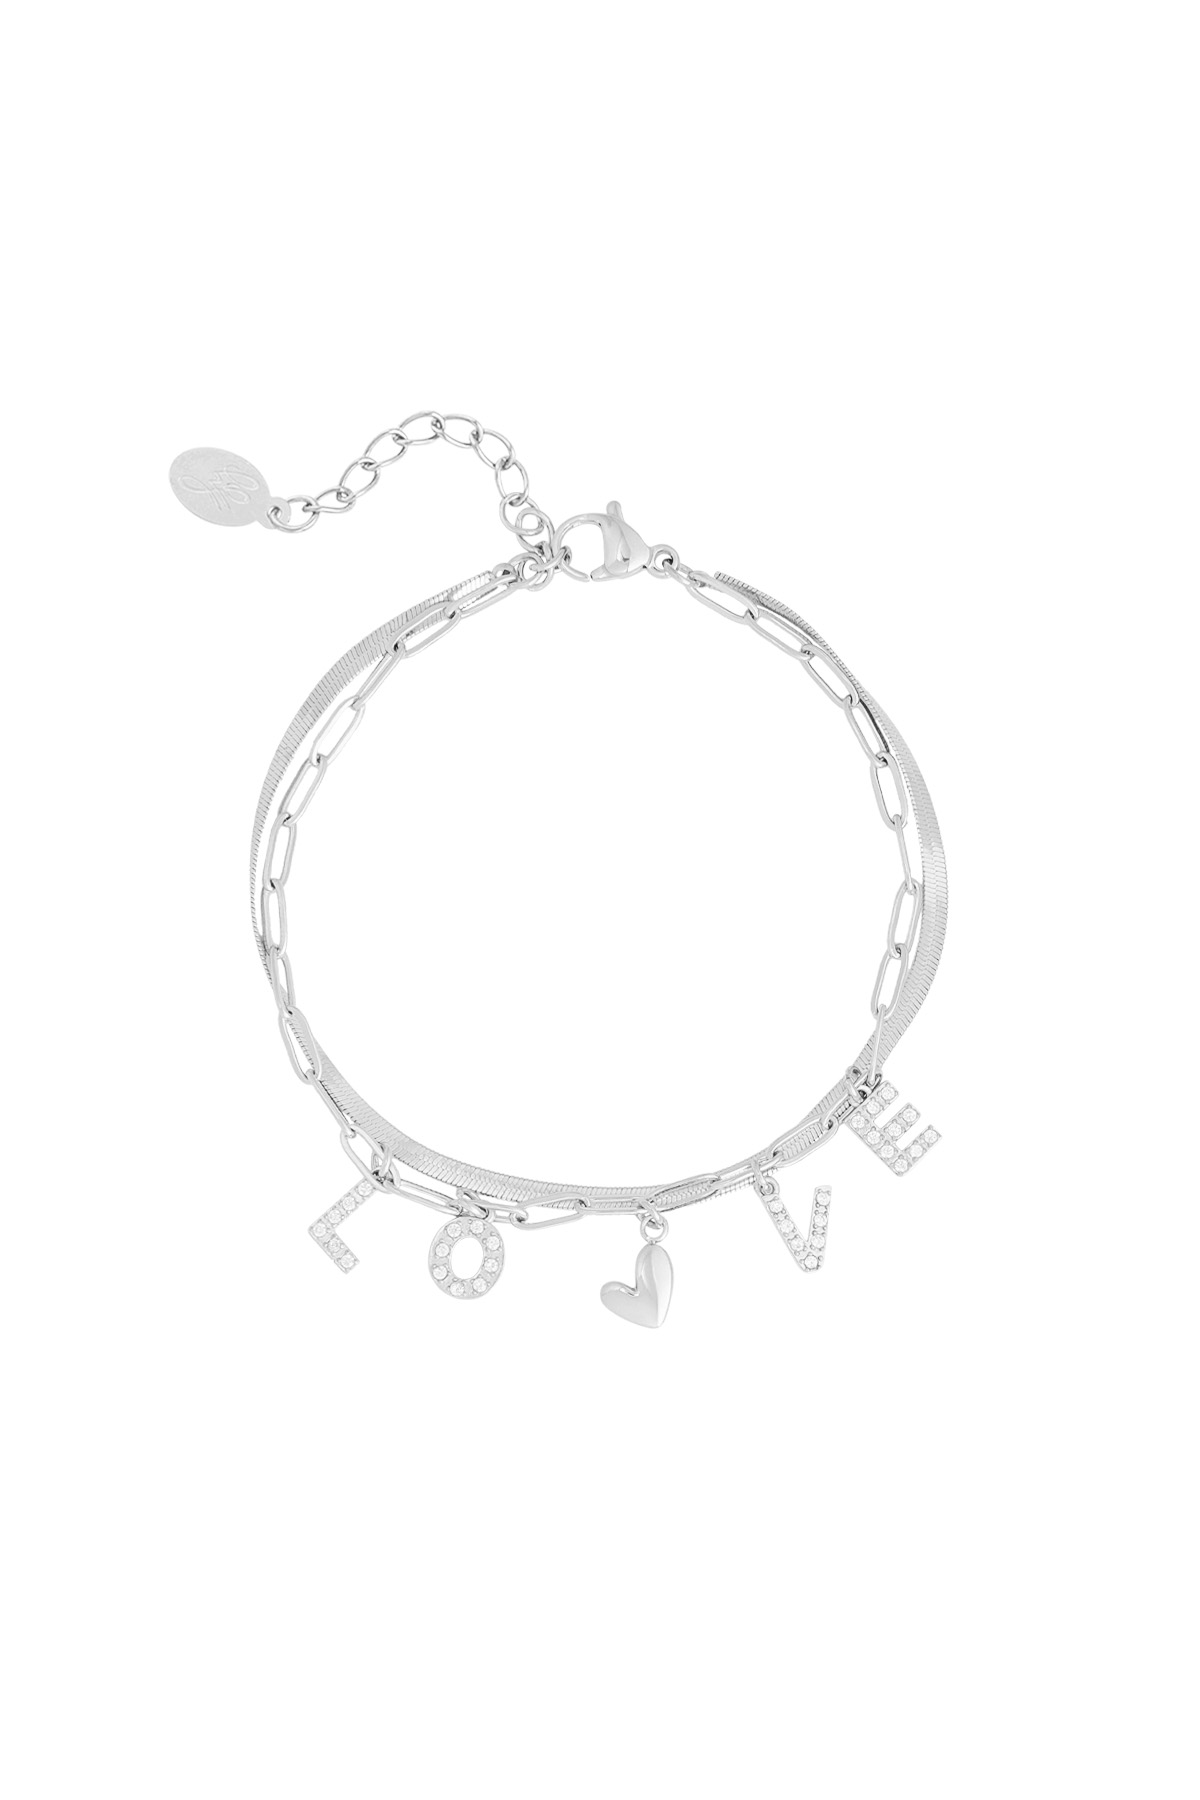 Love armband - zilver h5 